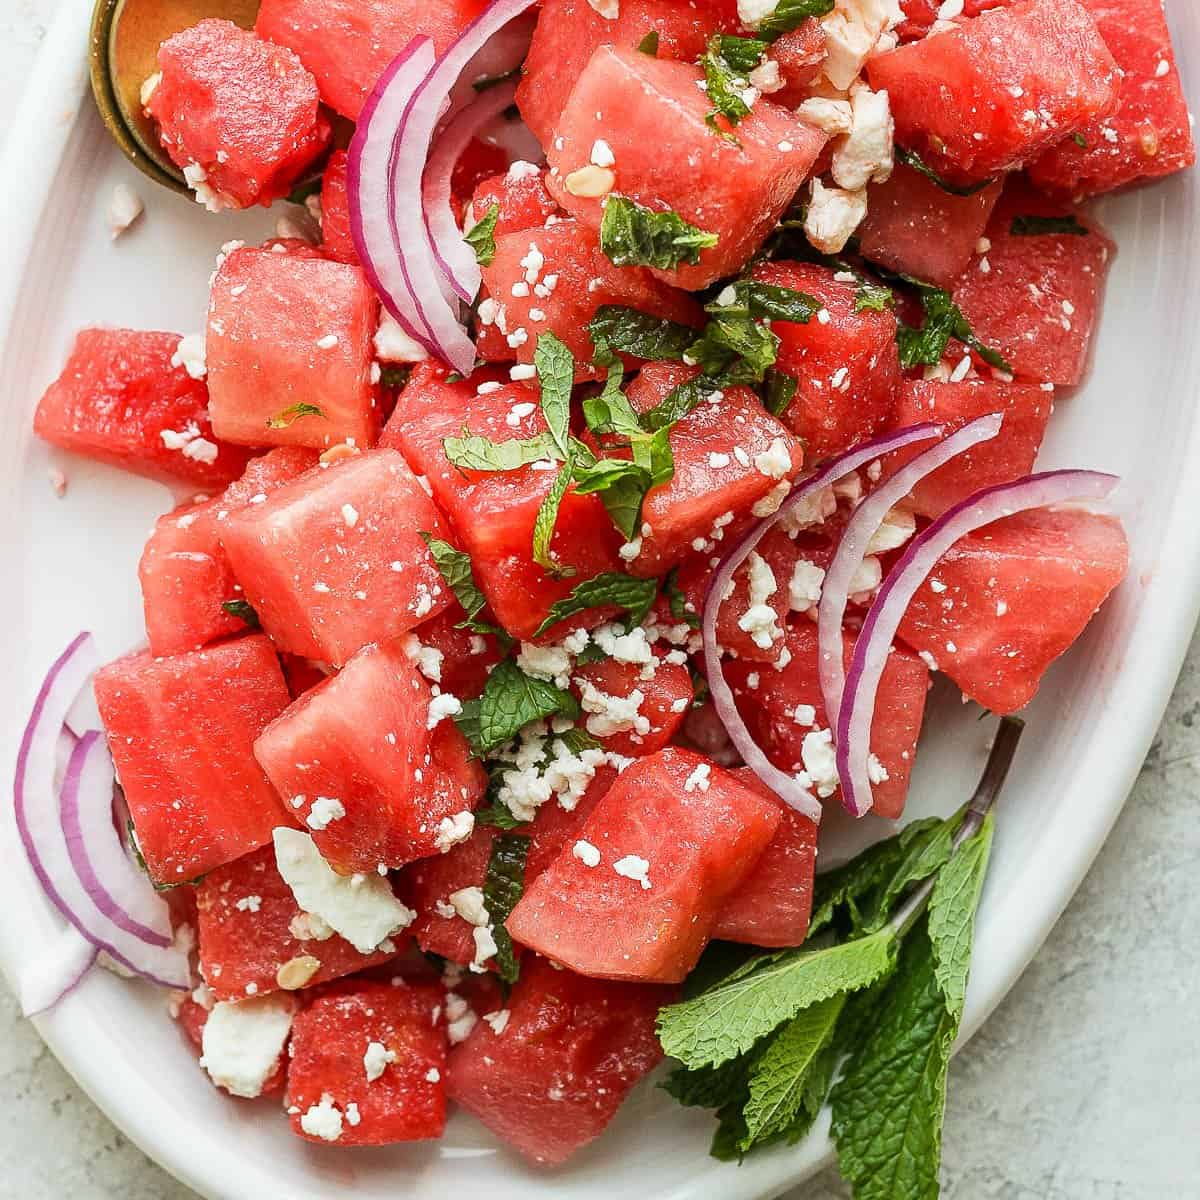 Recipe for a watermelon feta salad with mint.